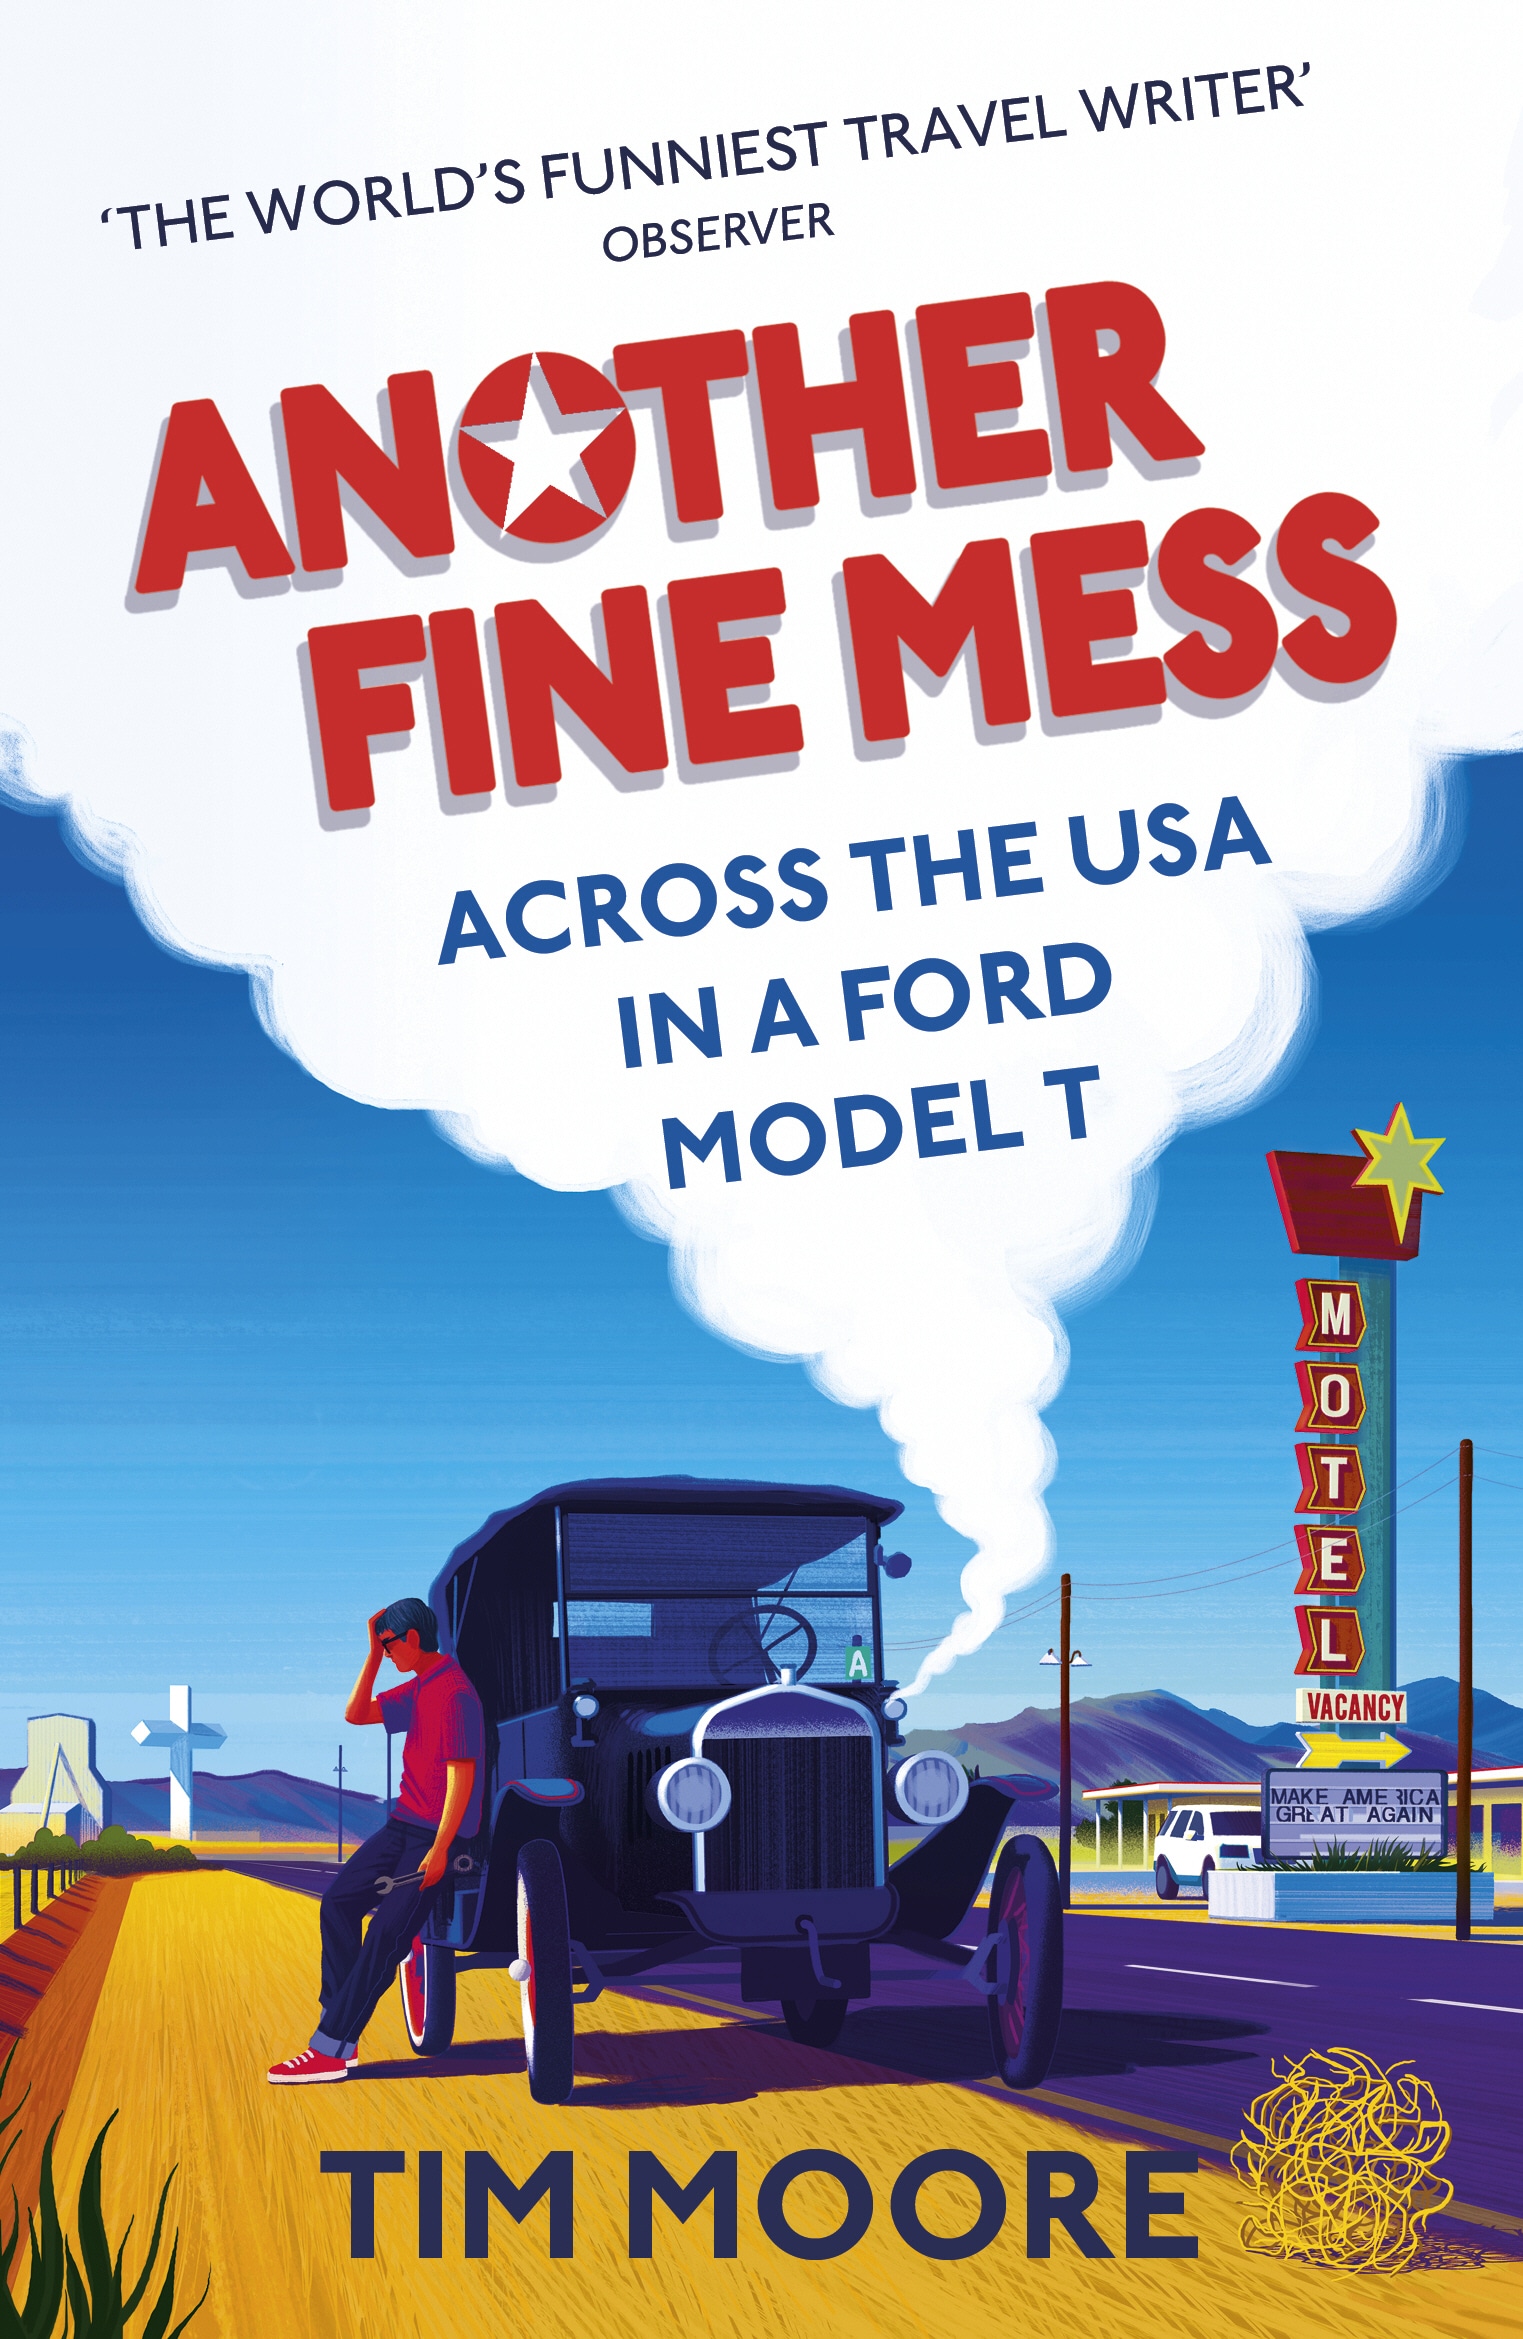 Book “Another Fine Mess” by Tim Moore — June 6, 2019